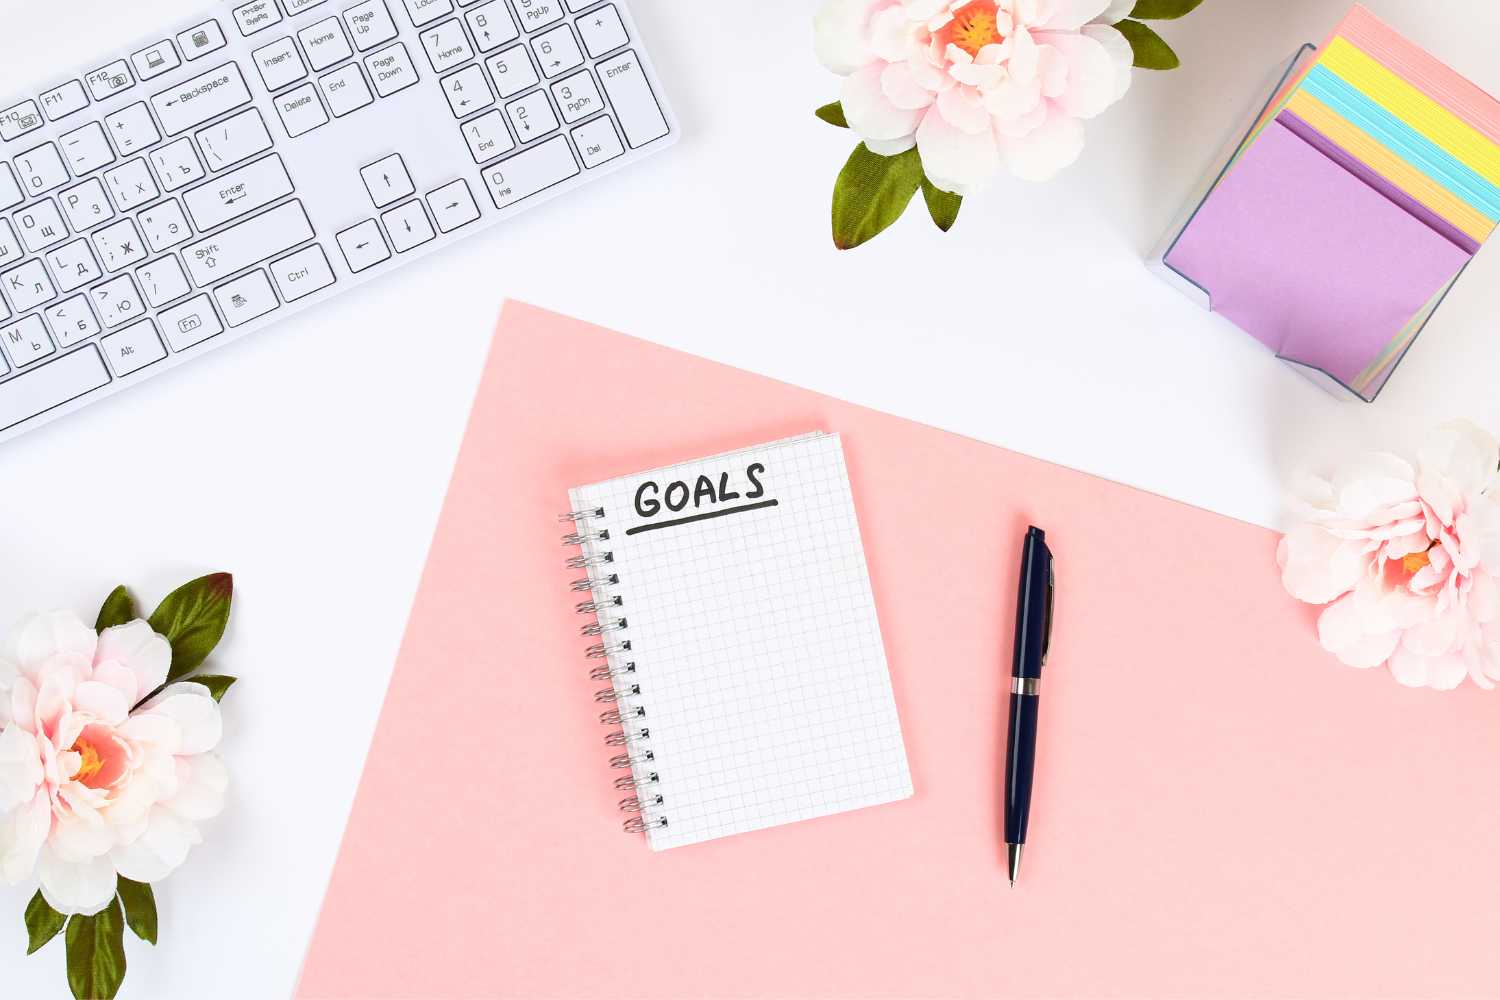 Get my top goal setting tips for high-achieving women.